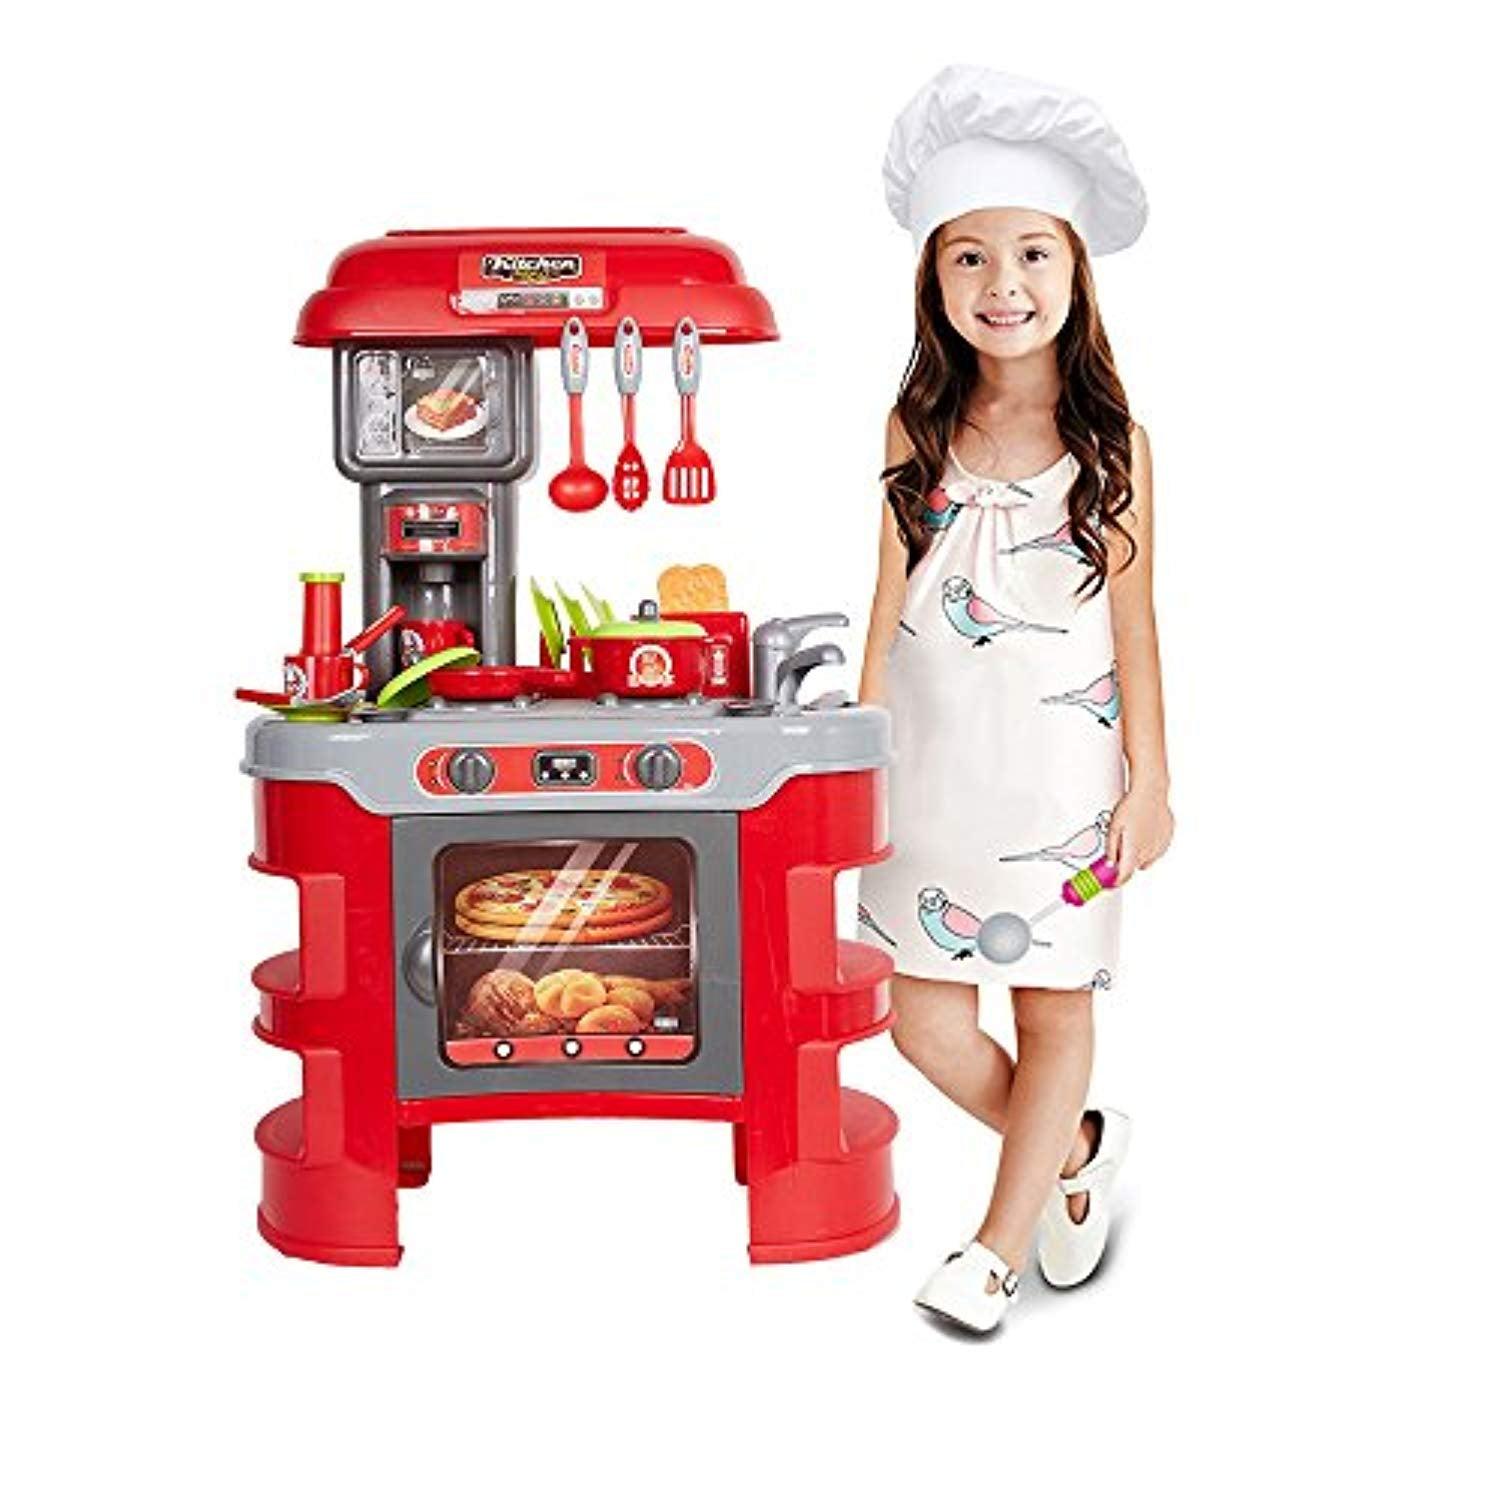 Bosonshop Kids Pretend Role Play Cook 's Store Kitchenware Super Chef Playset Toy, Red